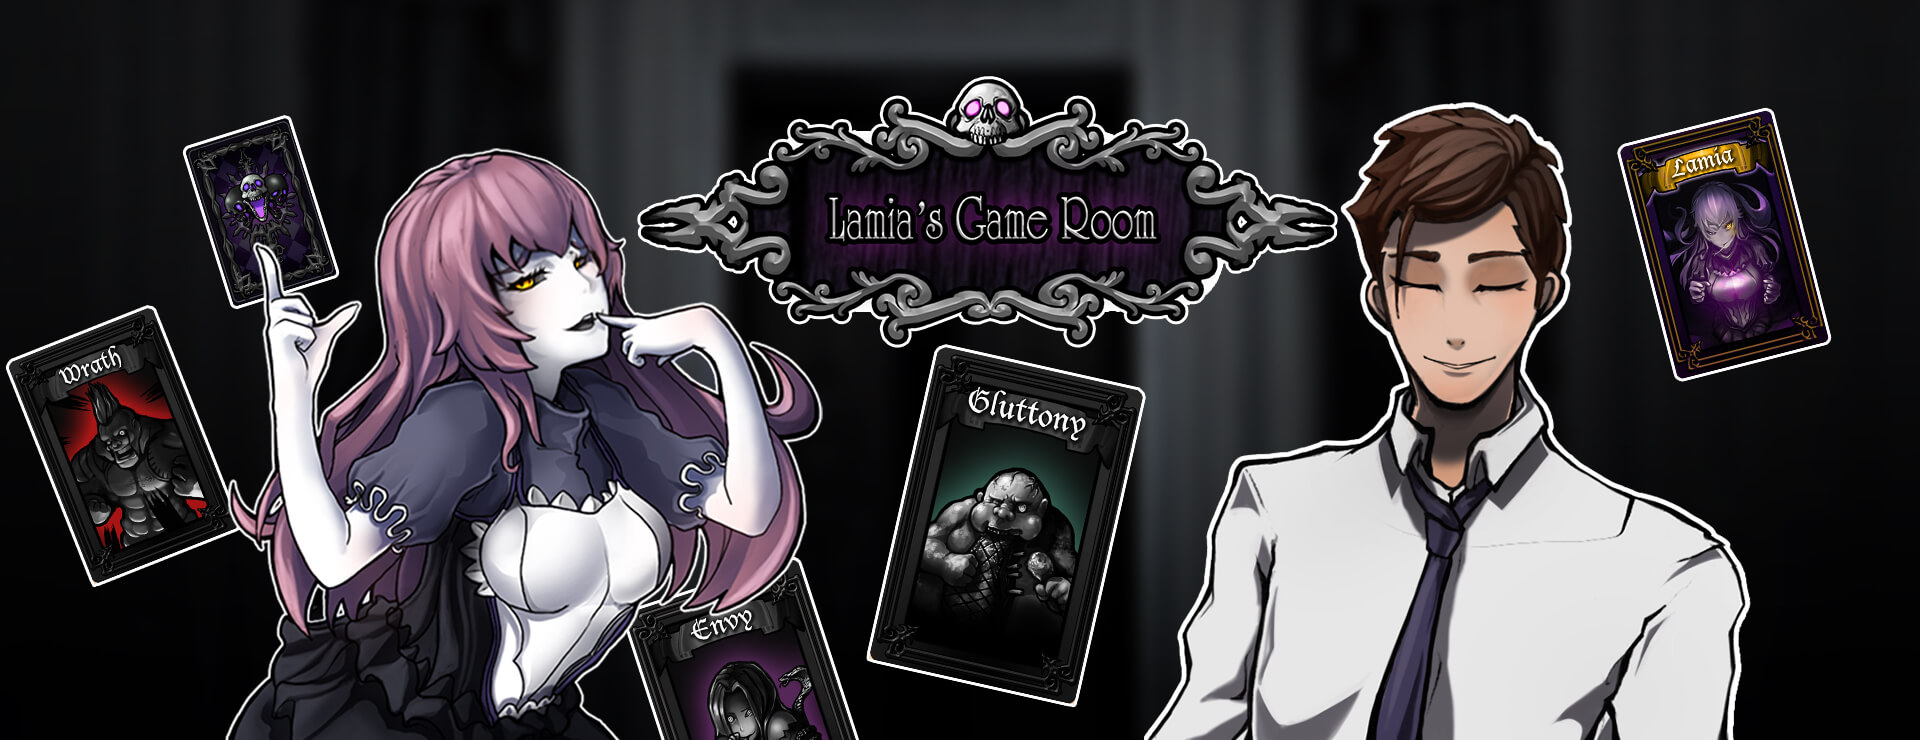 Lamia's Game Room - Strategy Game